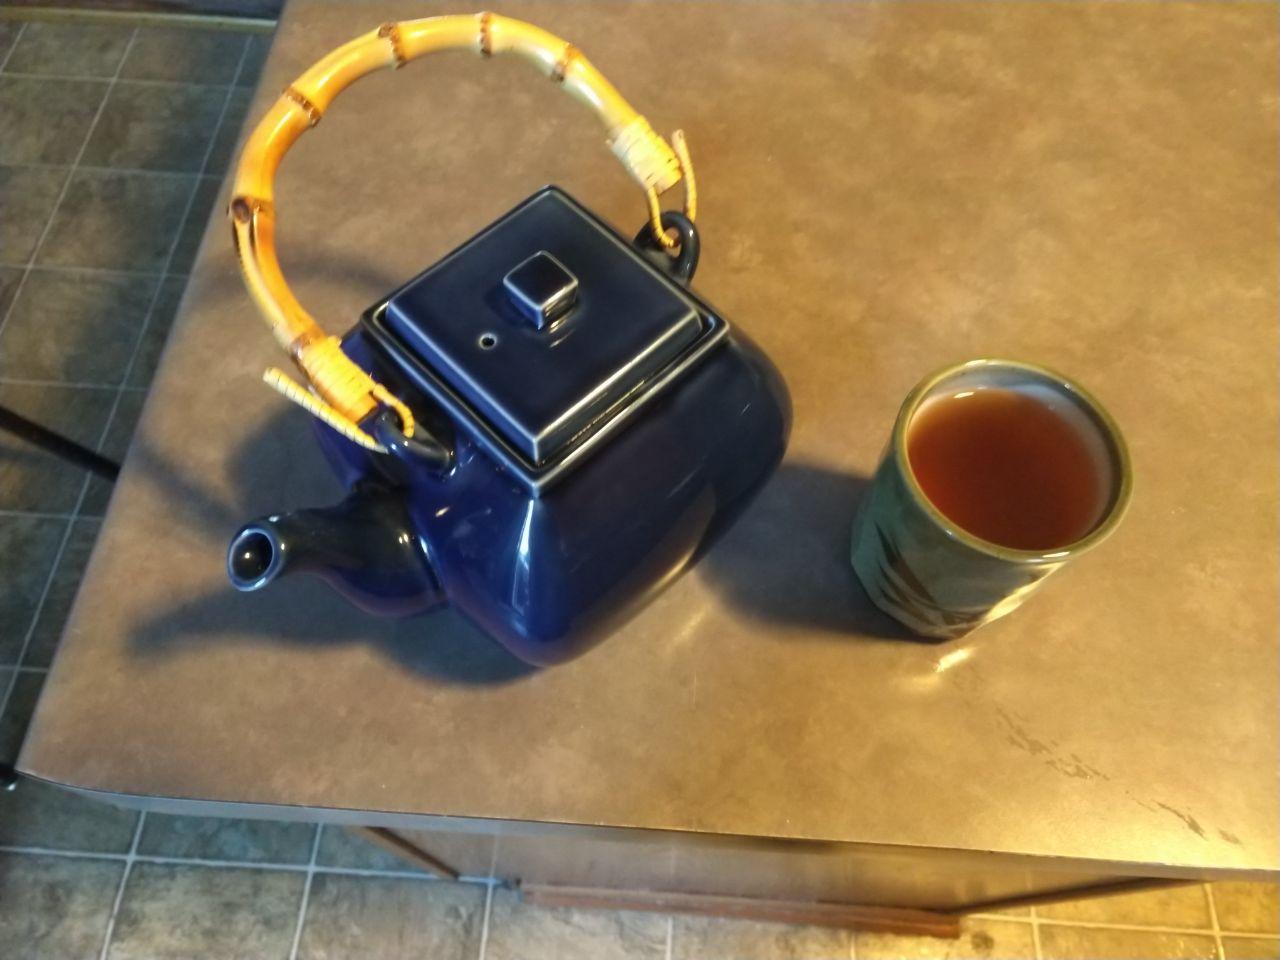 A blue teapot with a bamboo handle that I found at a thrift store.